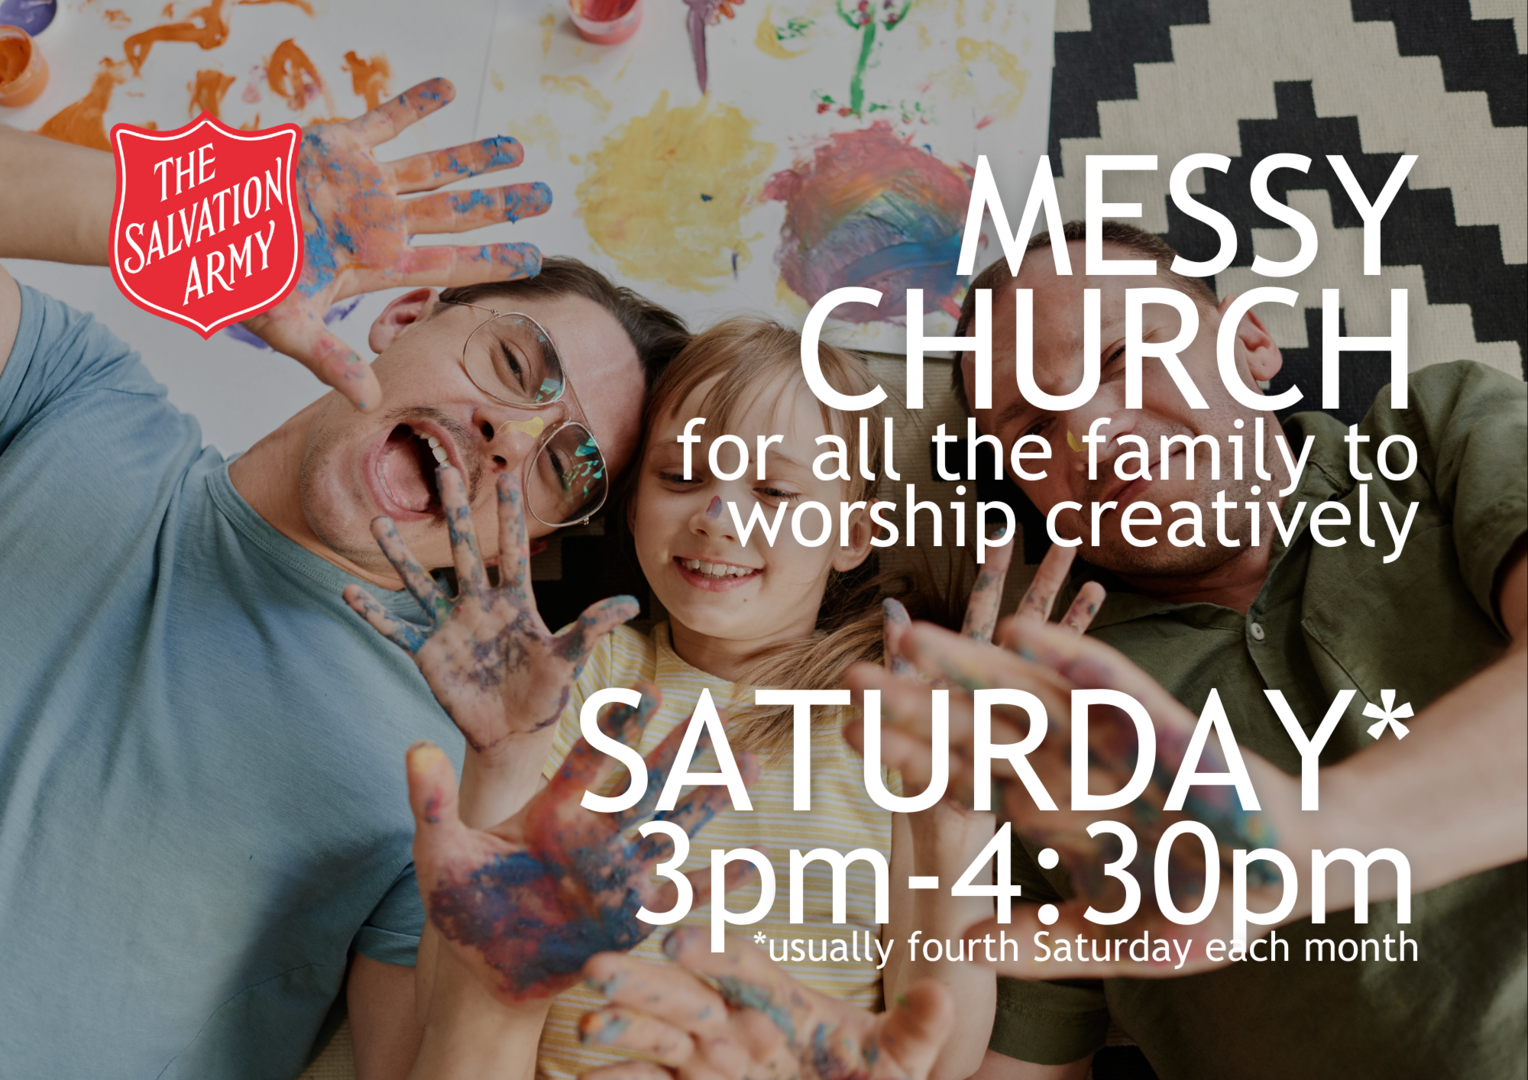 Messy Church, Saturday (monthly), 3pm-4:30pm